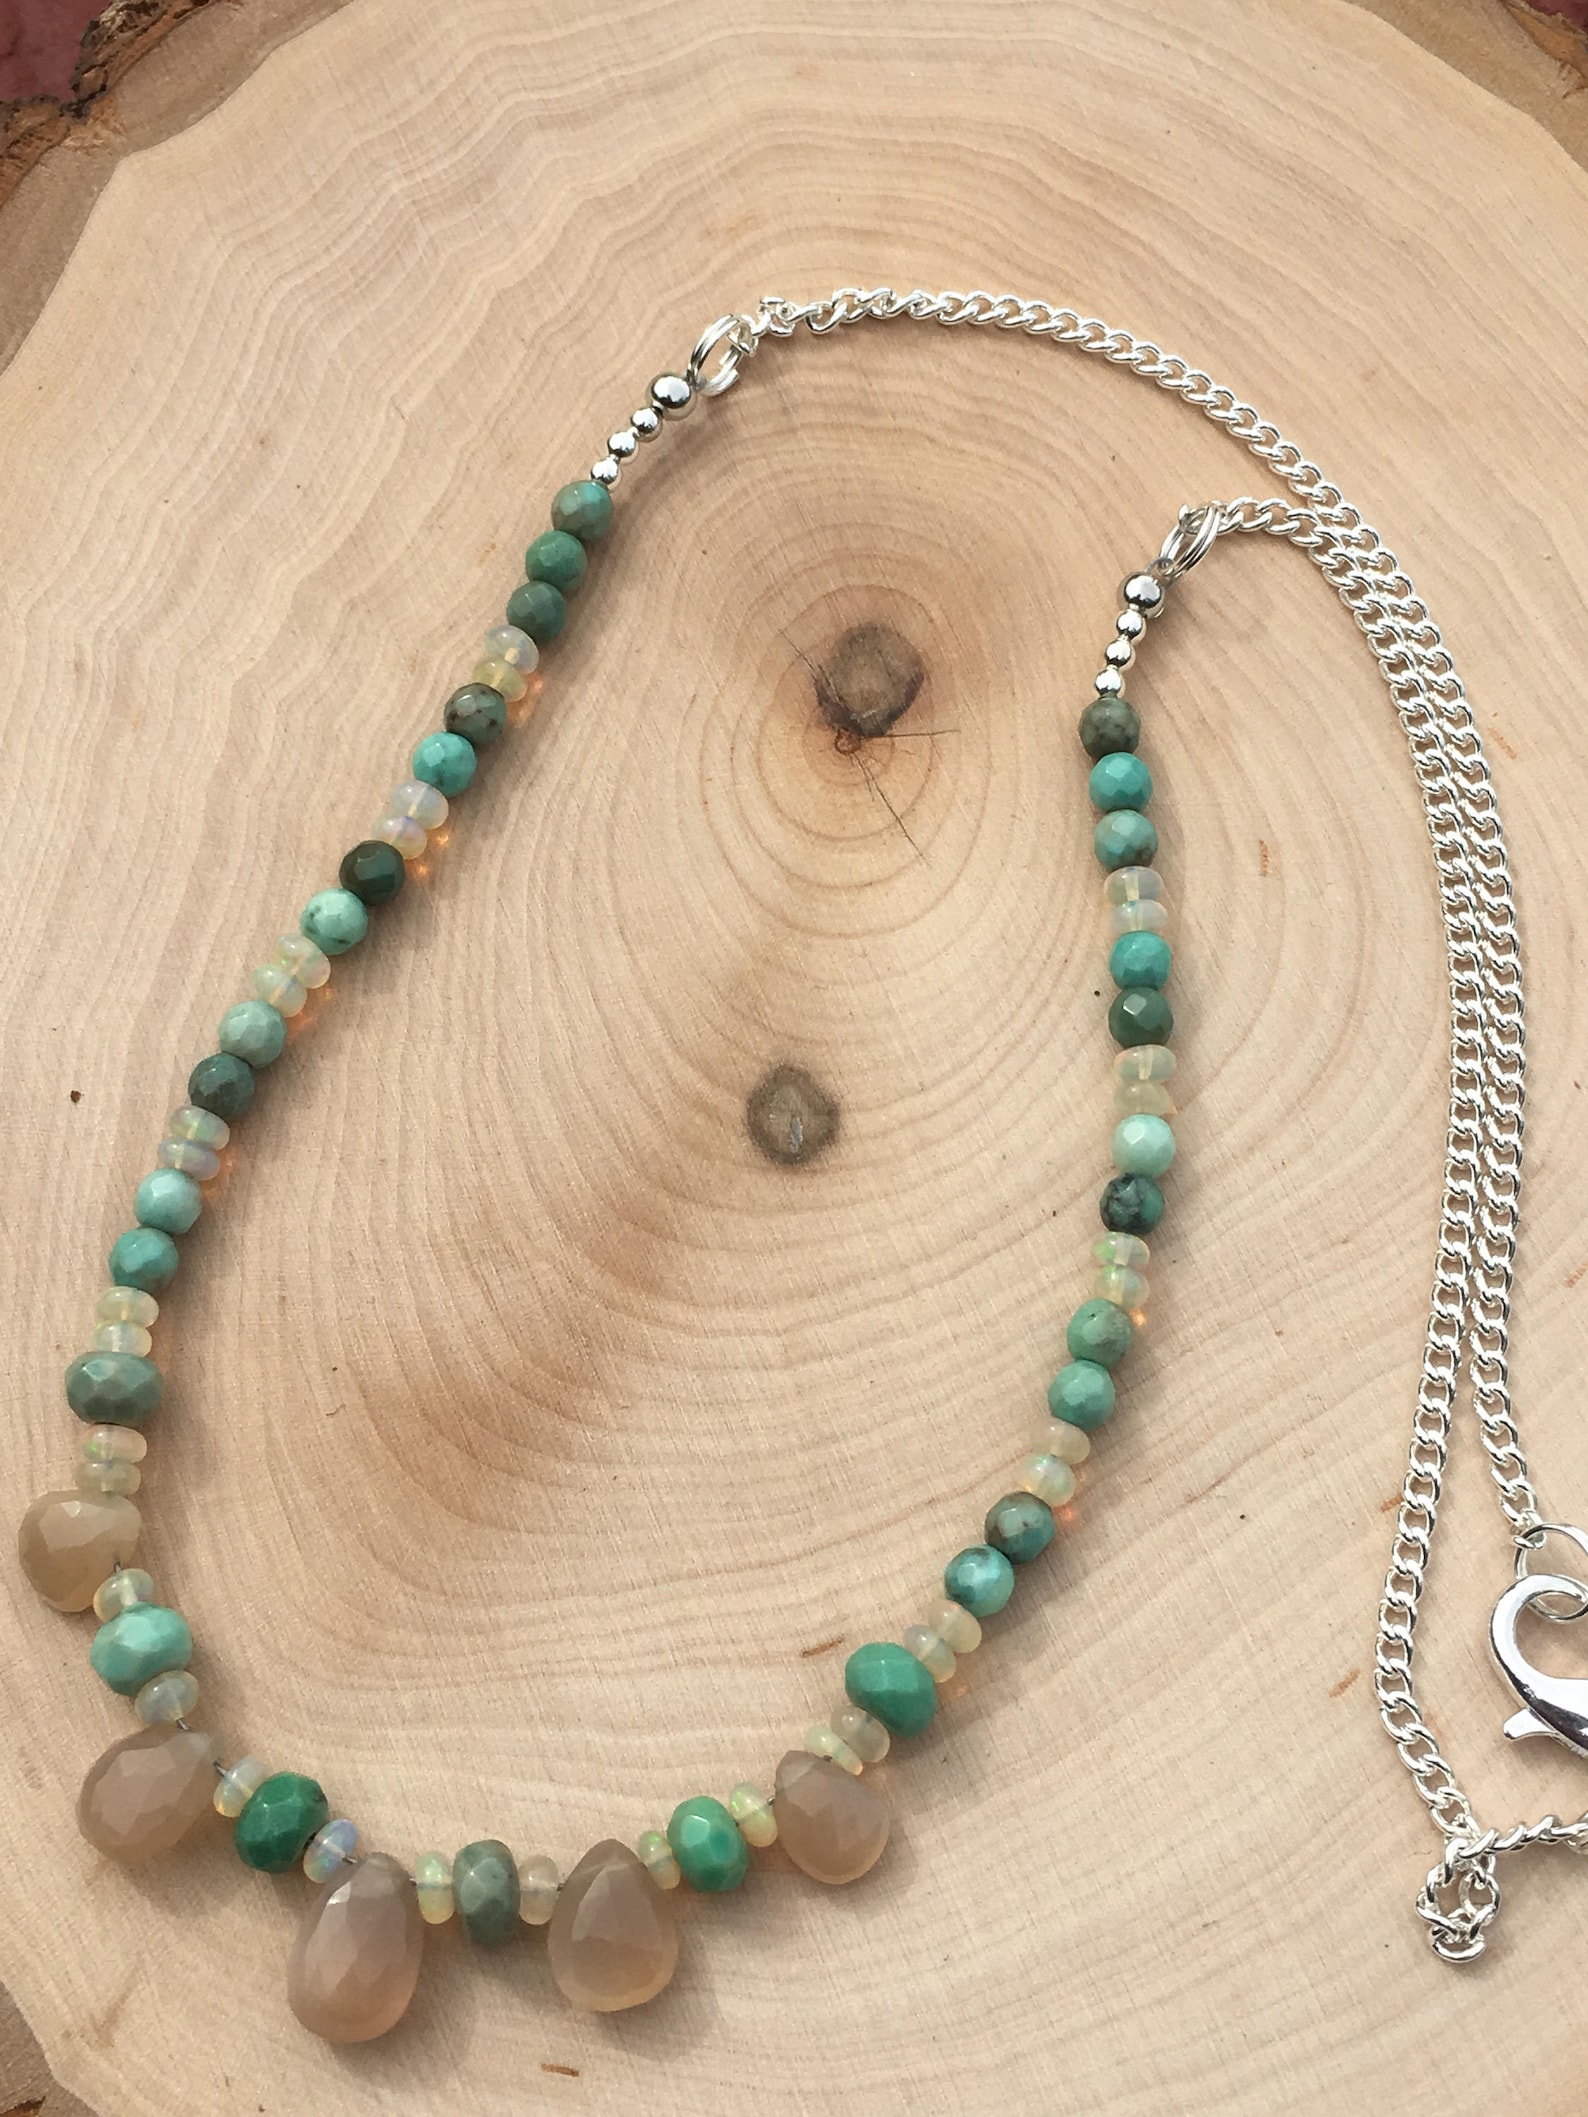 Chrysoprase Ethiopian Opal and Moonstone Beaded Necklace - Etsy